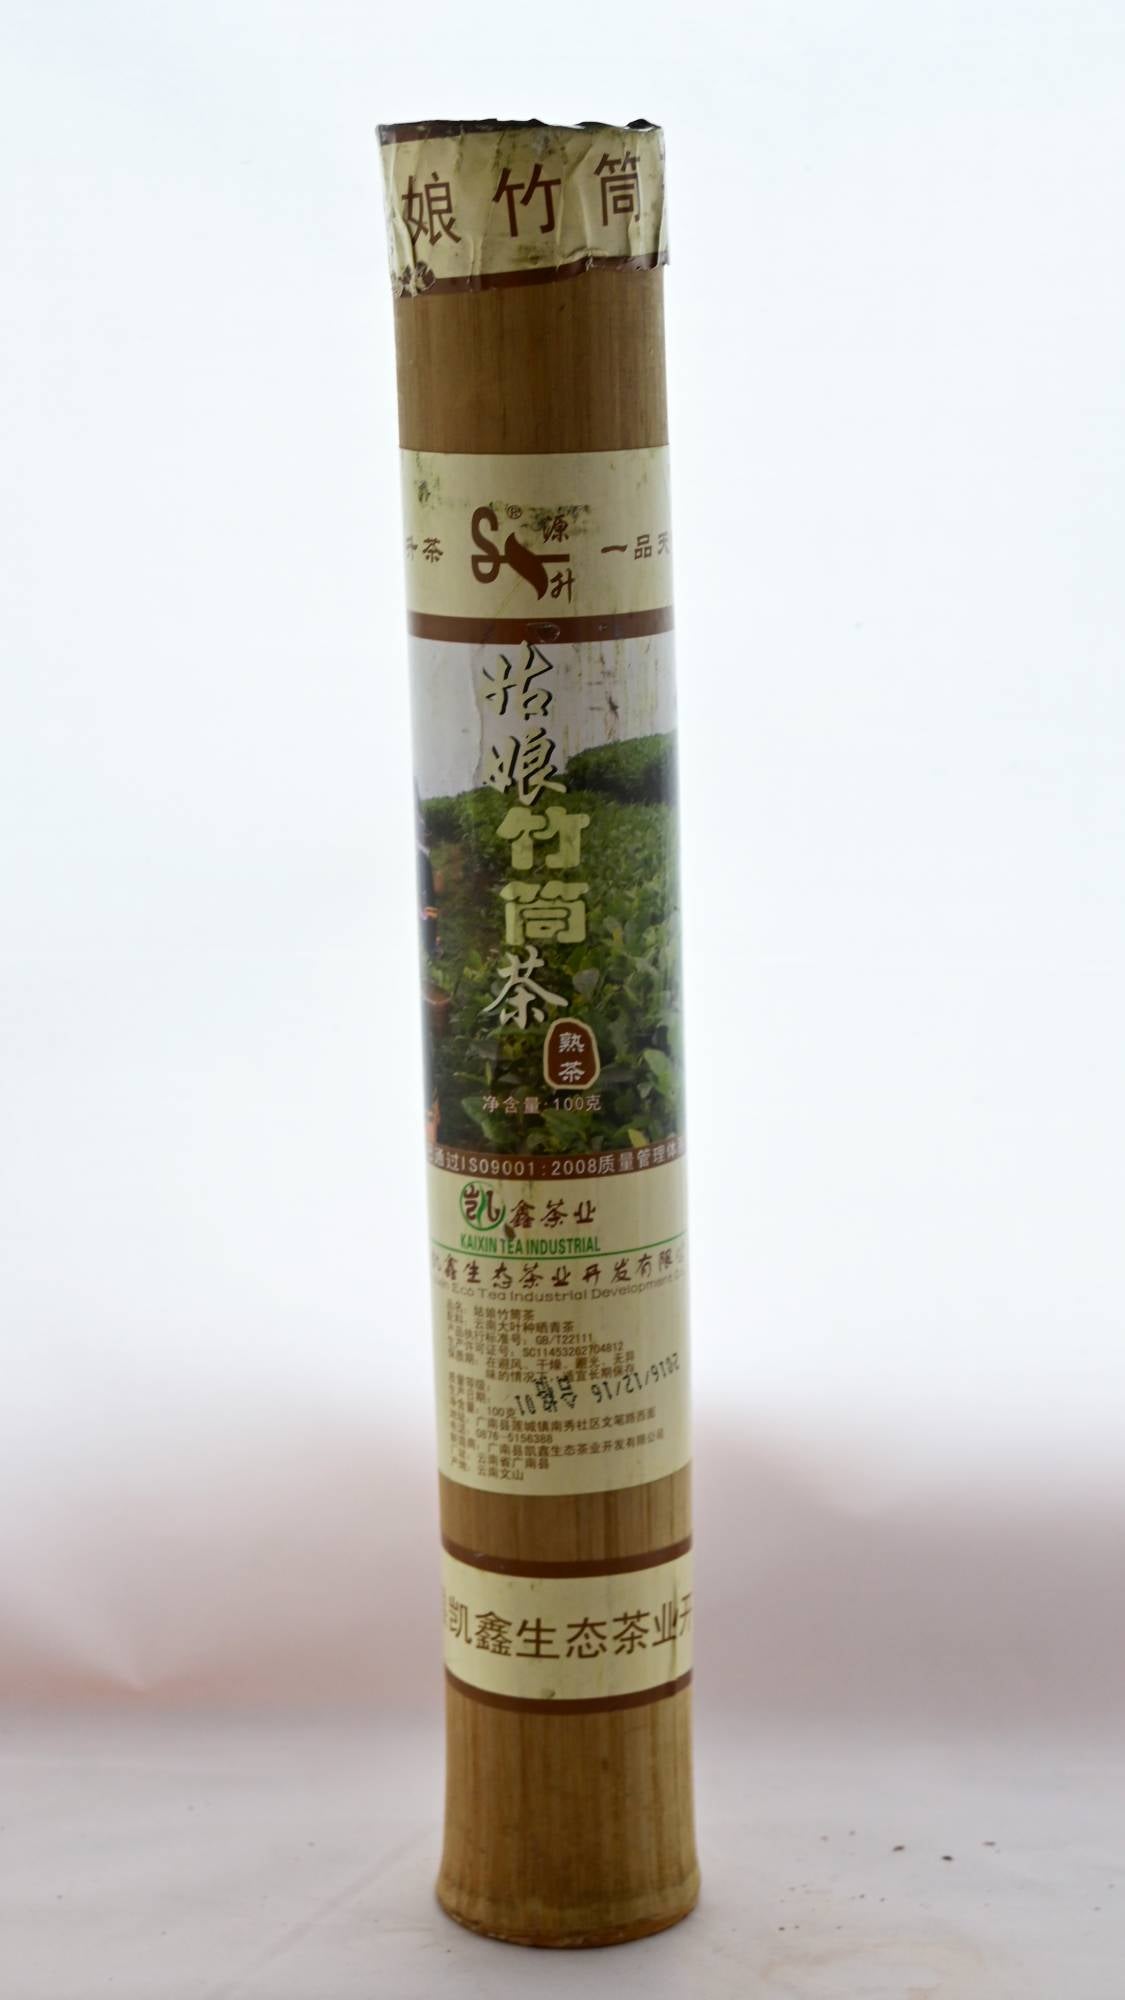 The Bamboo Pu'er container is made of hallow bamboo chute corked on each end with concrete. Packaging wrapping the bamboo segment has an image of tea fields, as well as Chinese lettering.